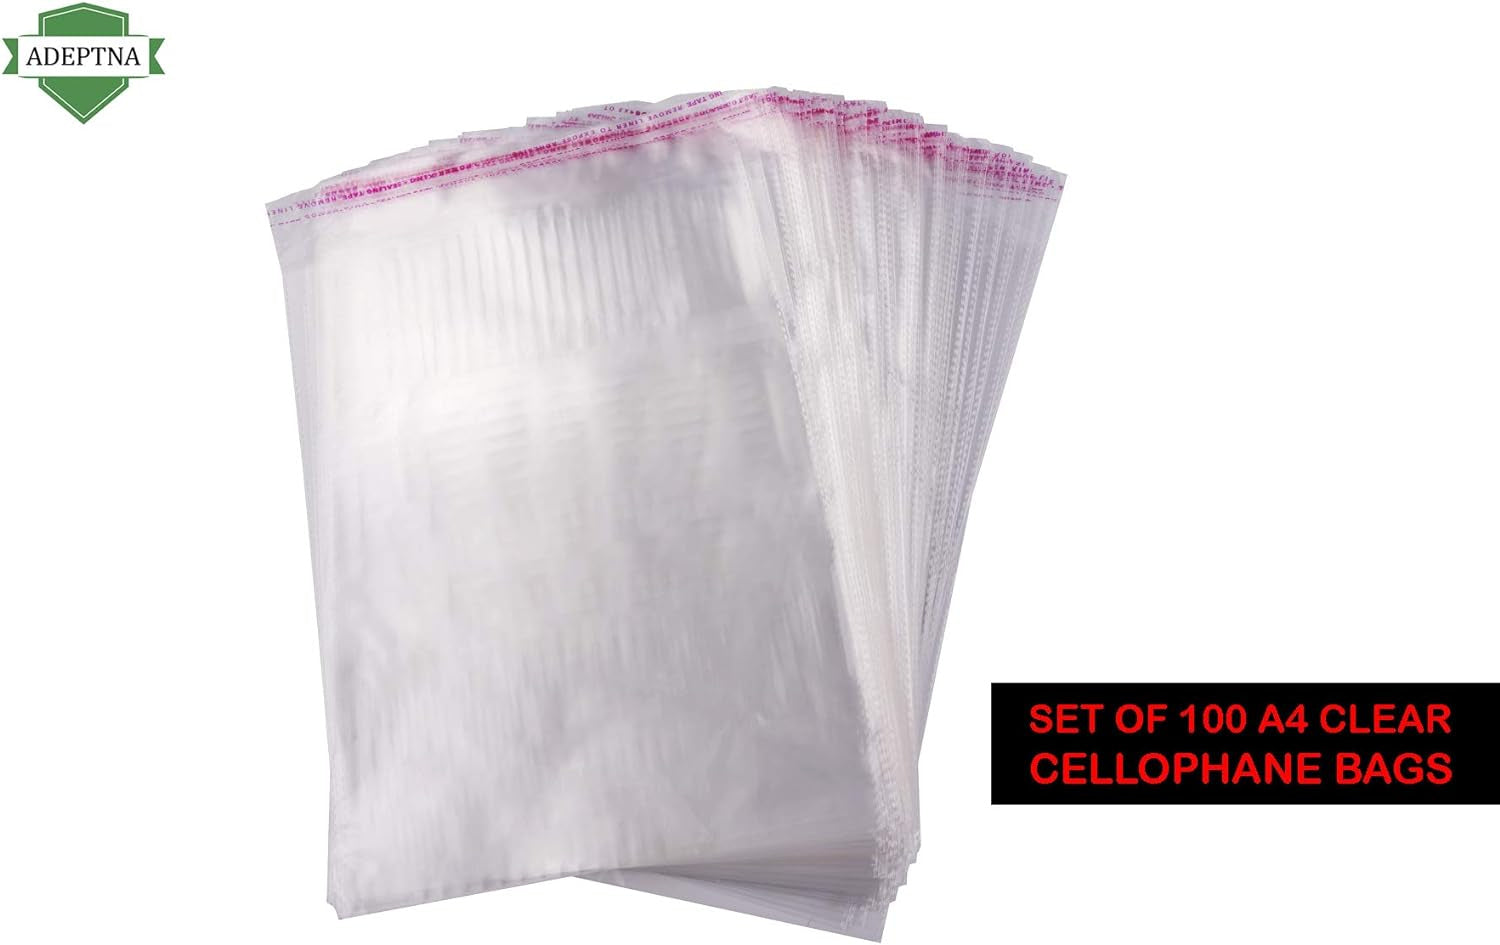 ADEPTNA Pack of 100 A4 Cello Bags Crystal Clear - Cellophane Self Seal Bags